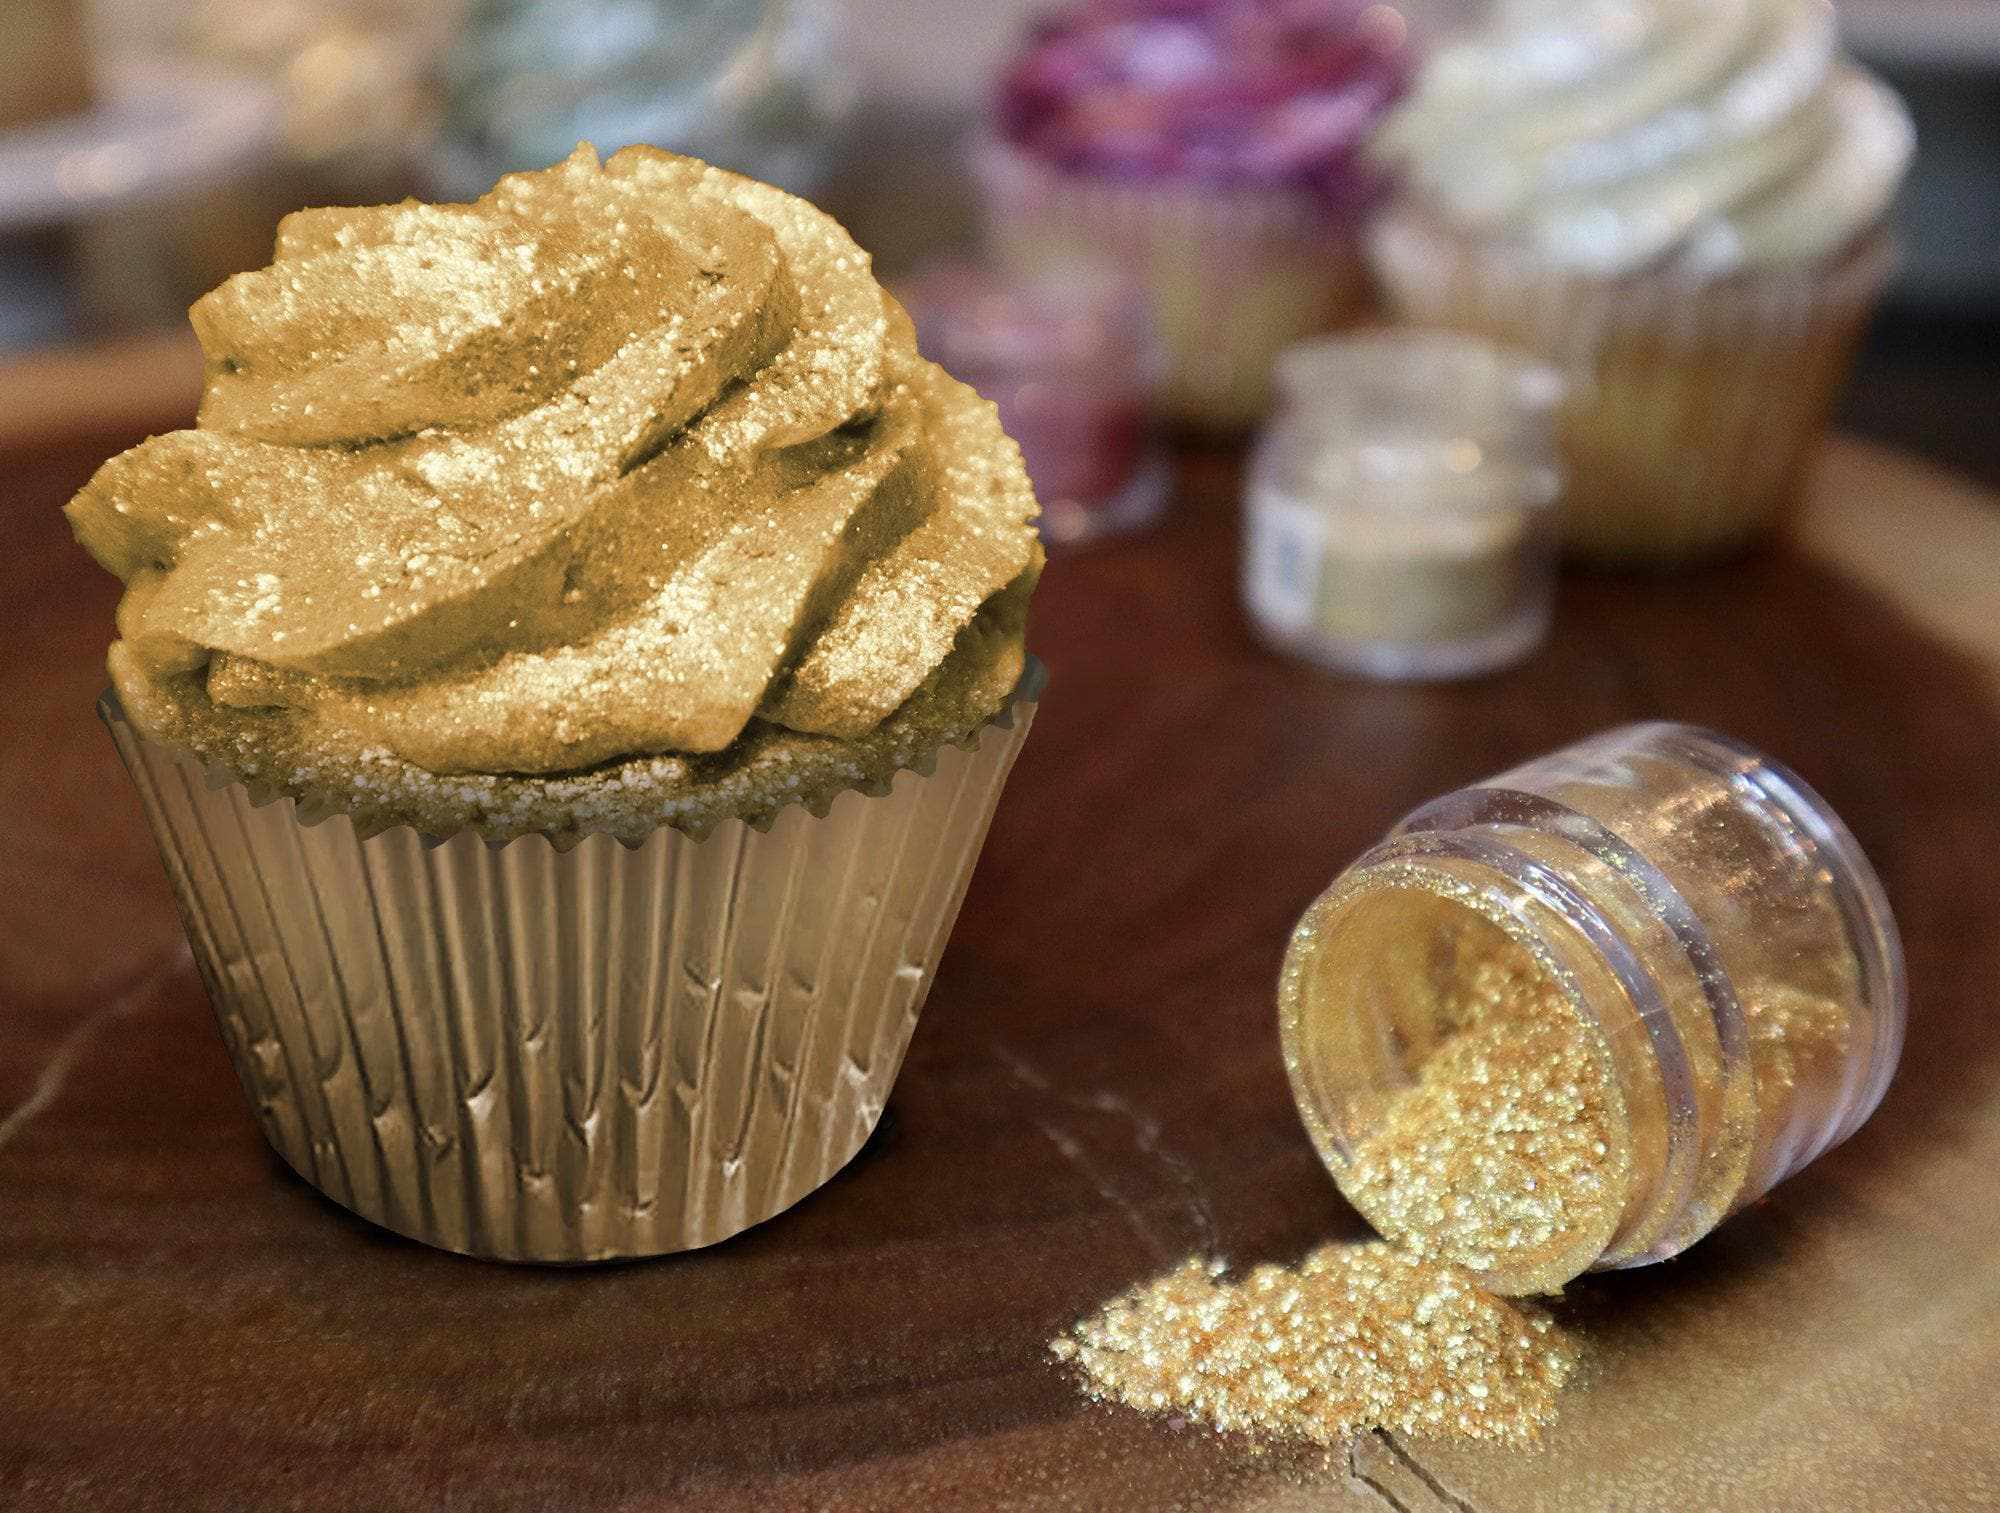 Cupcake cover in Gold Edible Glitter, and a Jar Spilled with Golden Edible Glitter to the Right | bakell.com